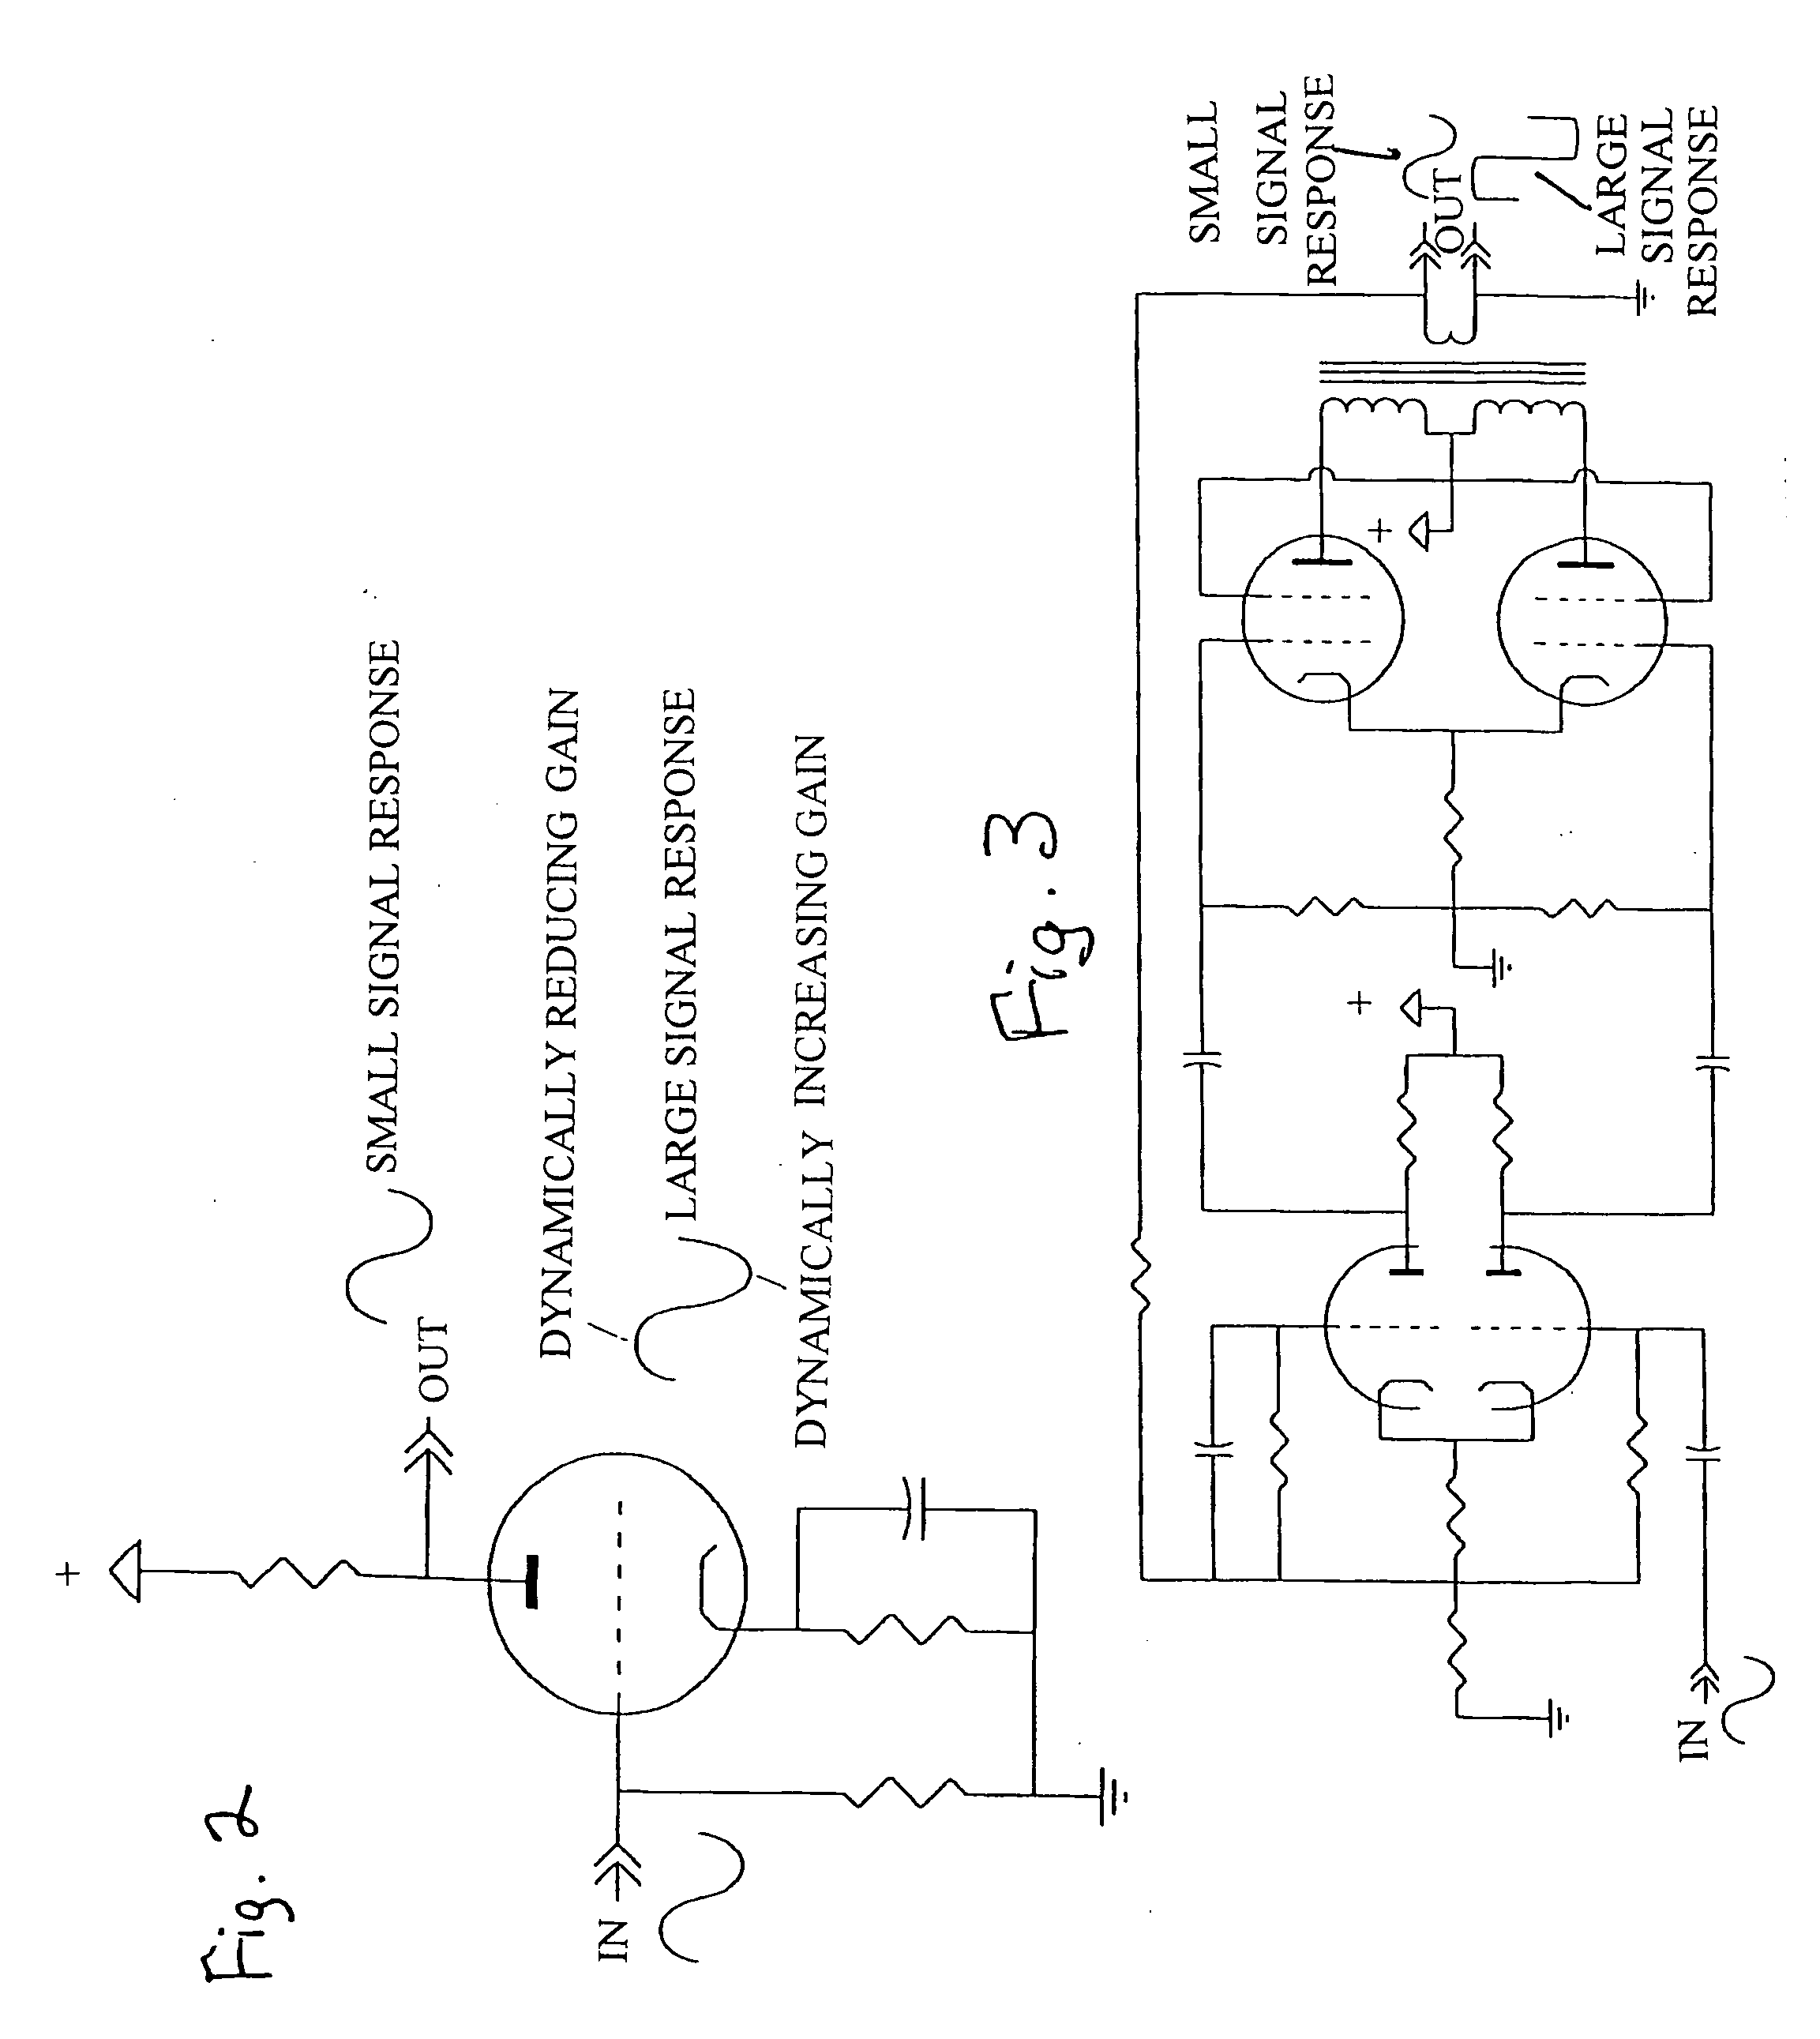 Stringed instrument with simulator preamplifier